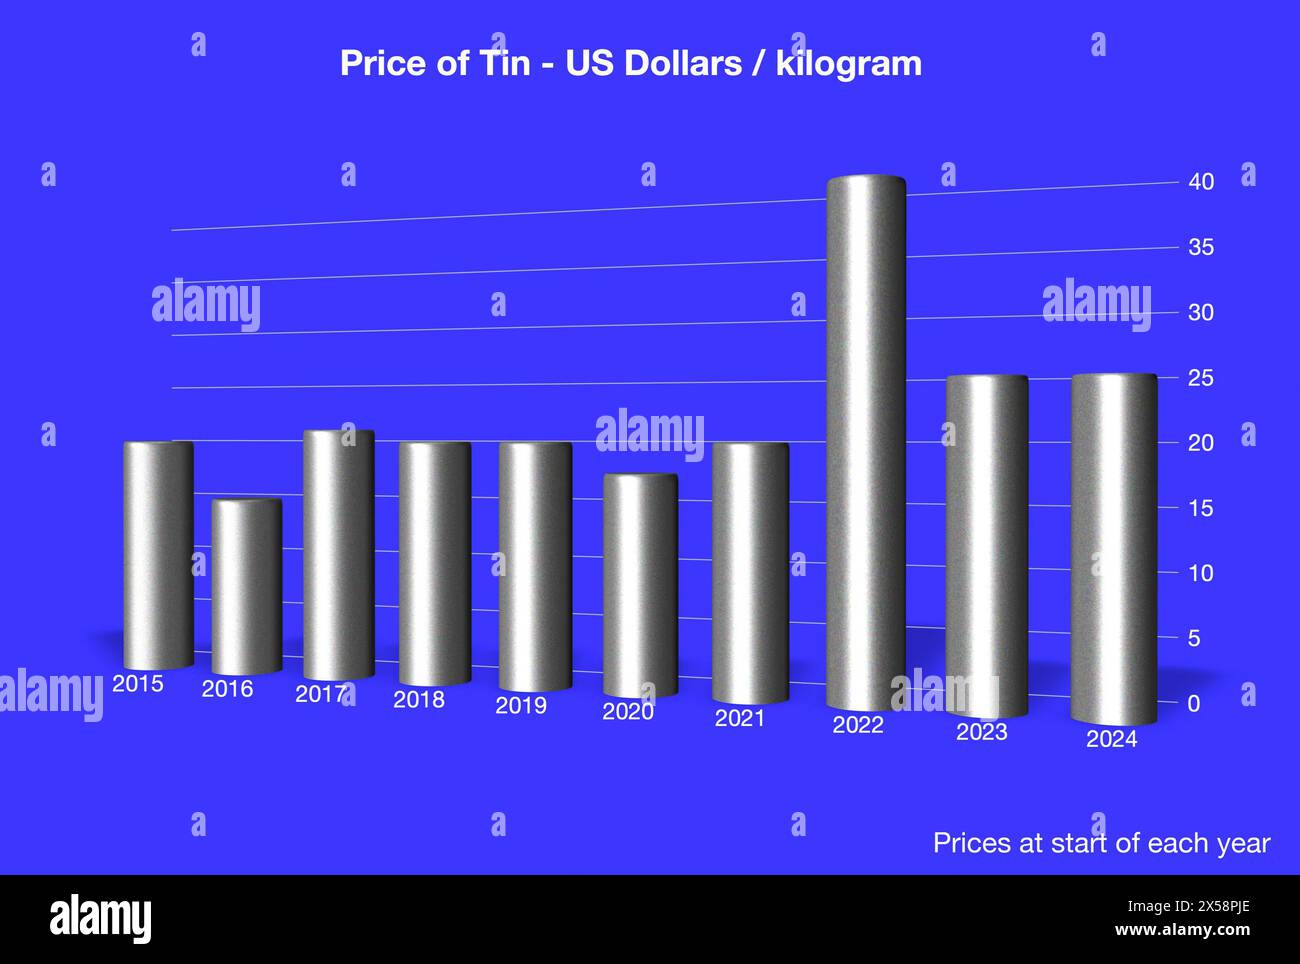 Tin price bar chart / graph with 3D effect showing actual price in US Dollars at the start of each year from 2015-2024 Stock Photo